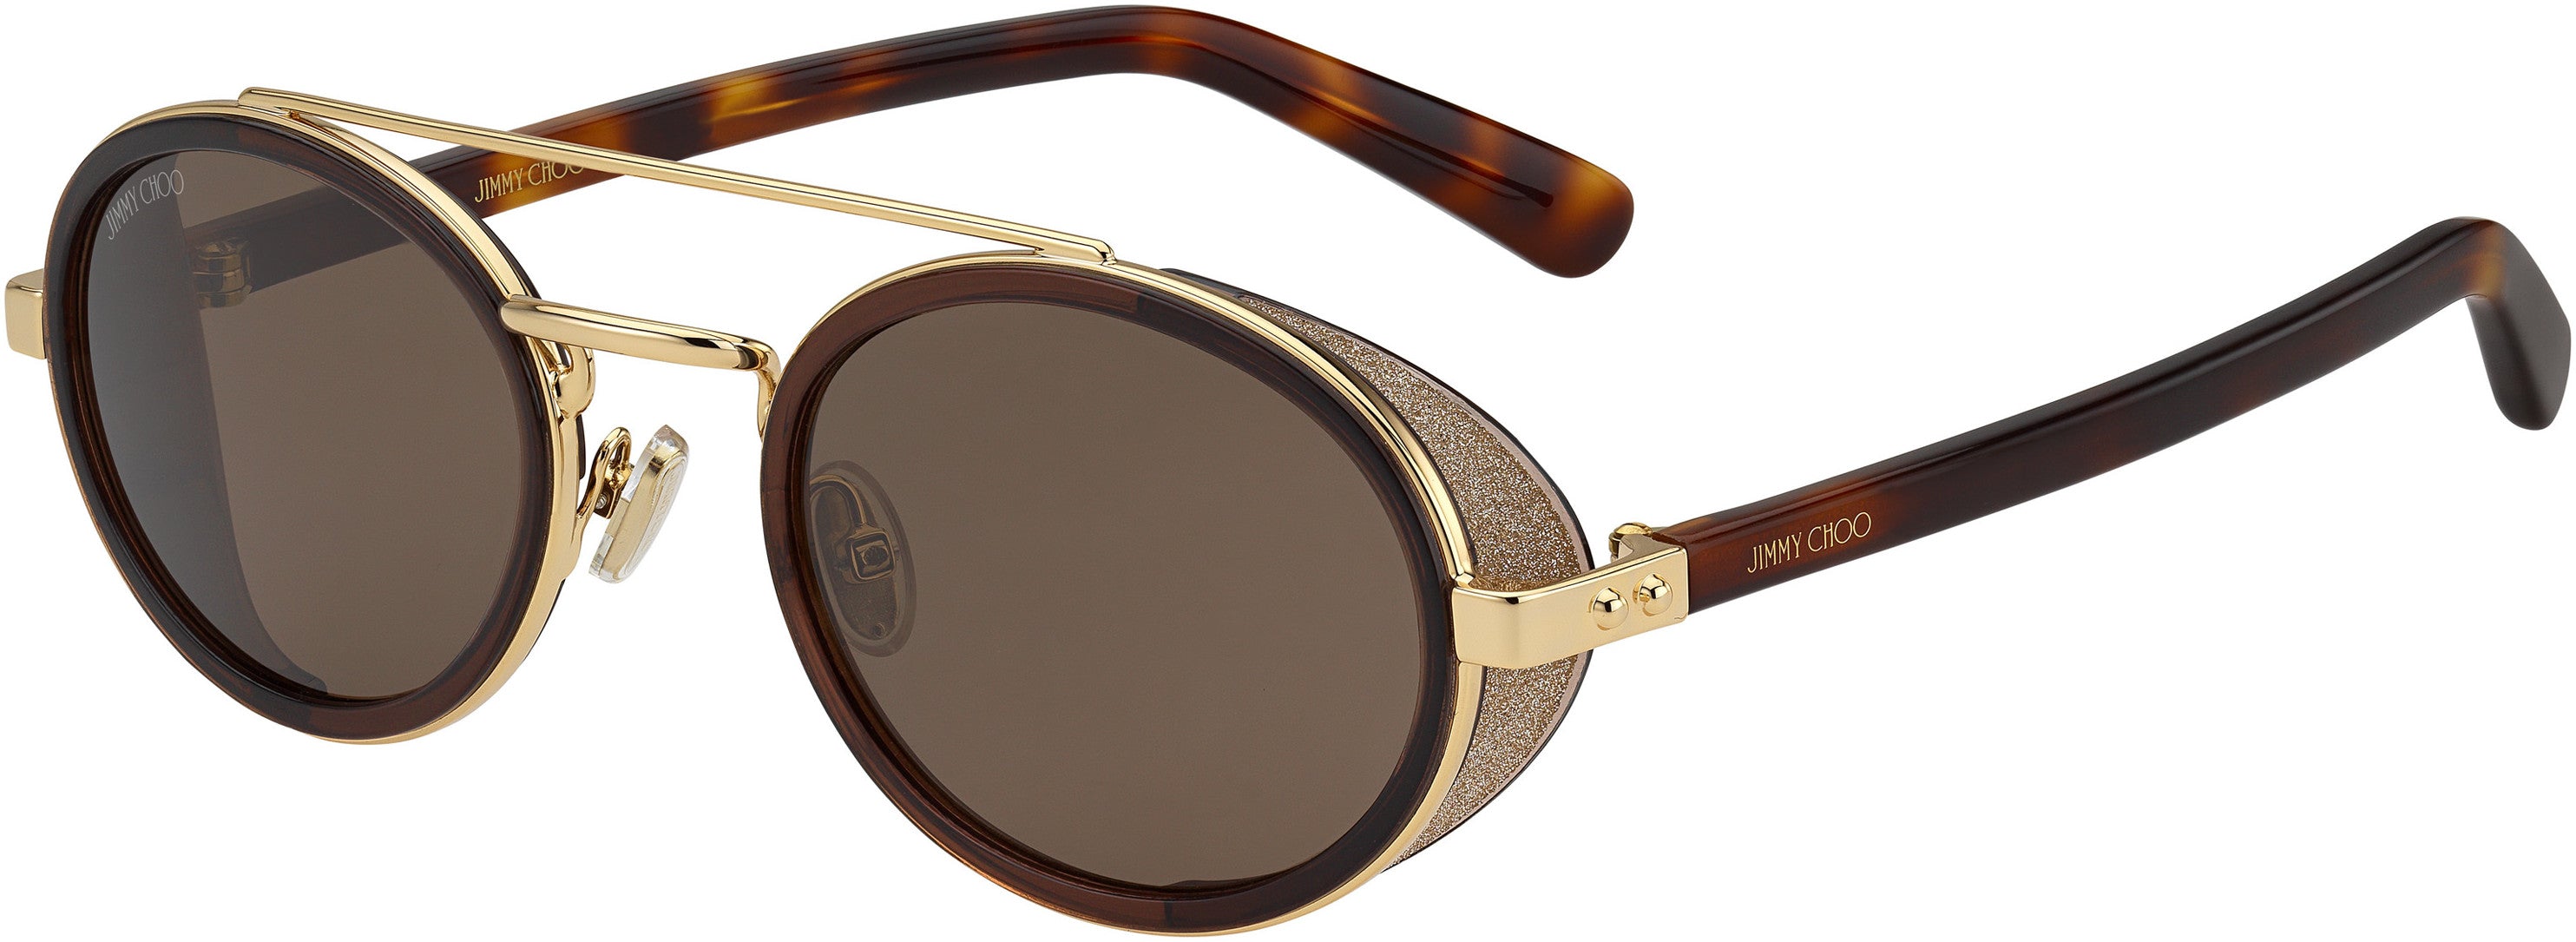 Jimmy Choo Tonie/S Oval Modified Sunglasses 0FG4-0FG4  Brown Gold (70 Brown)